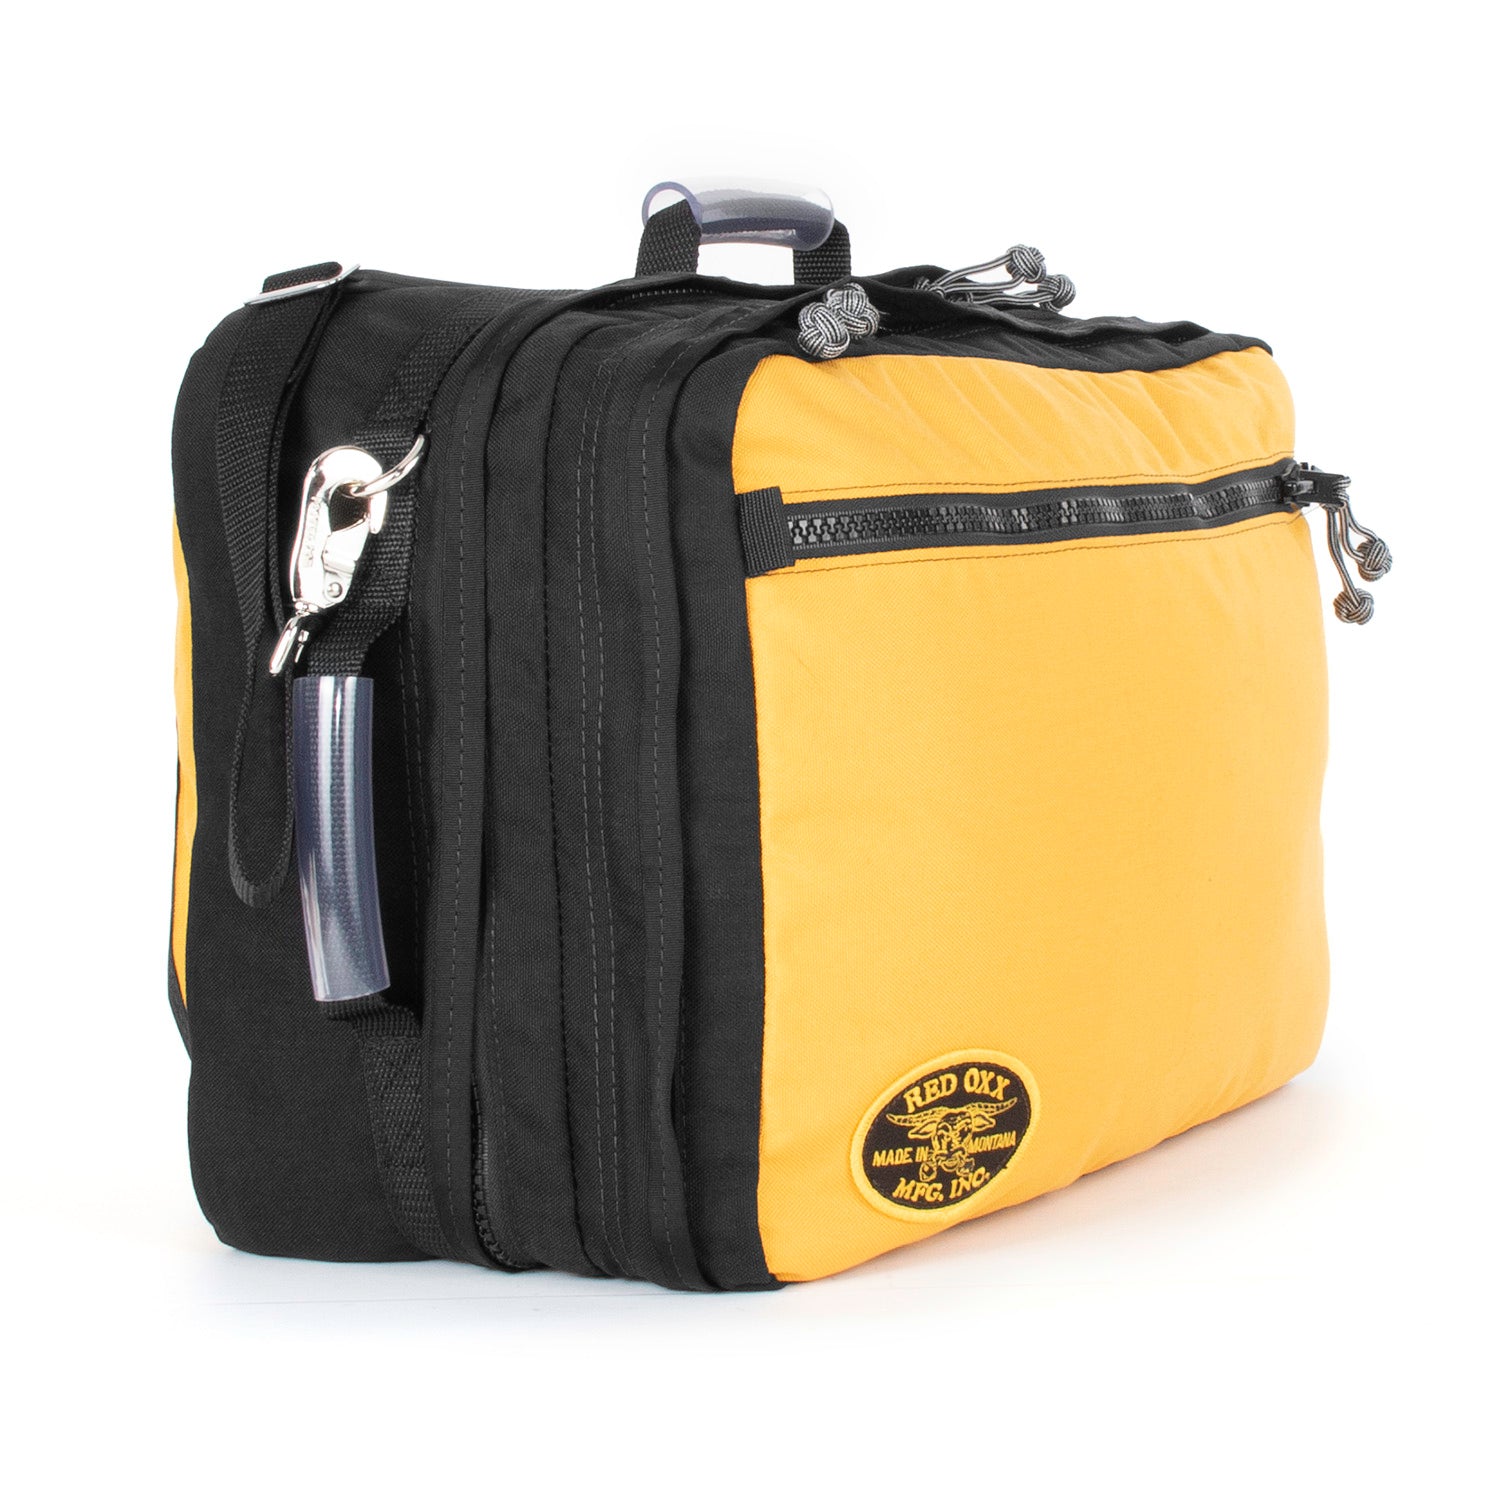 Grab loop on top of bag for easy handling and stowing while boarding aircraft. 